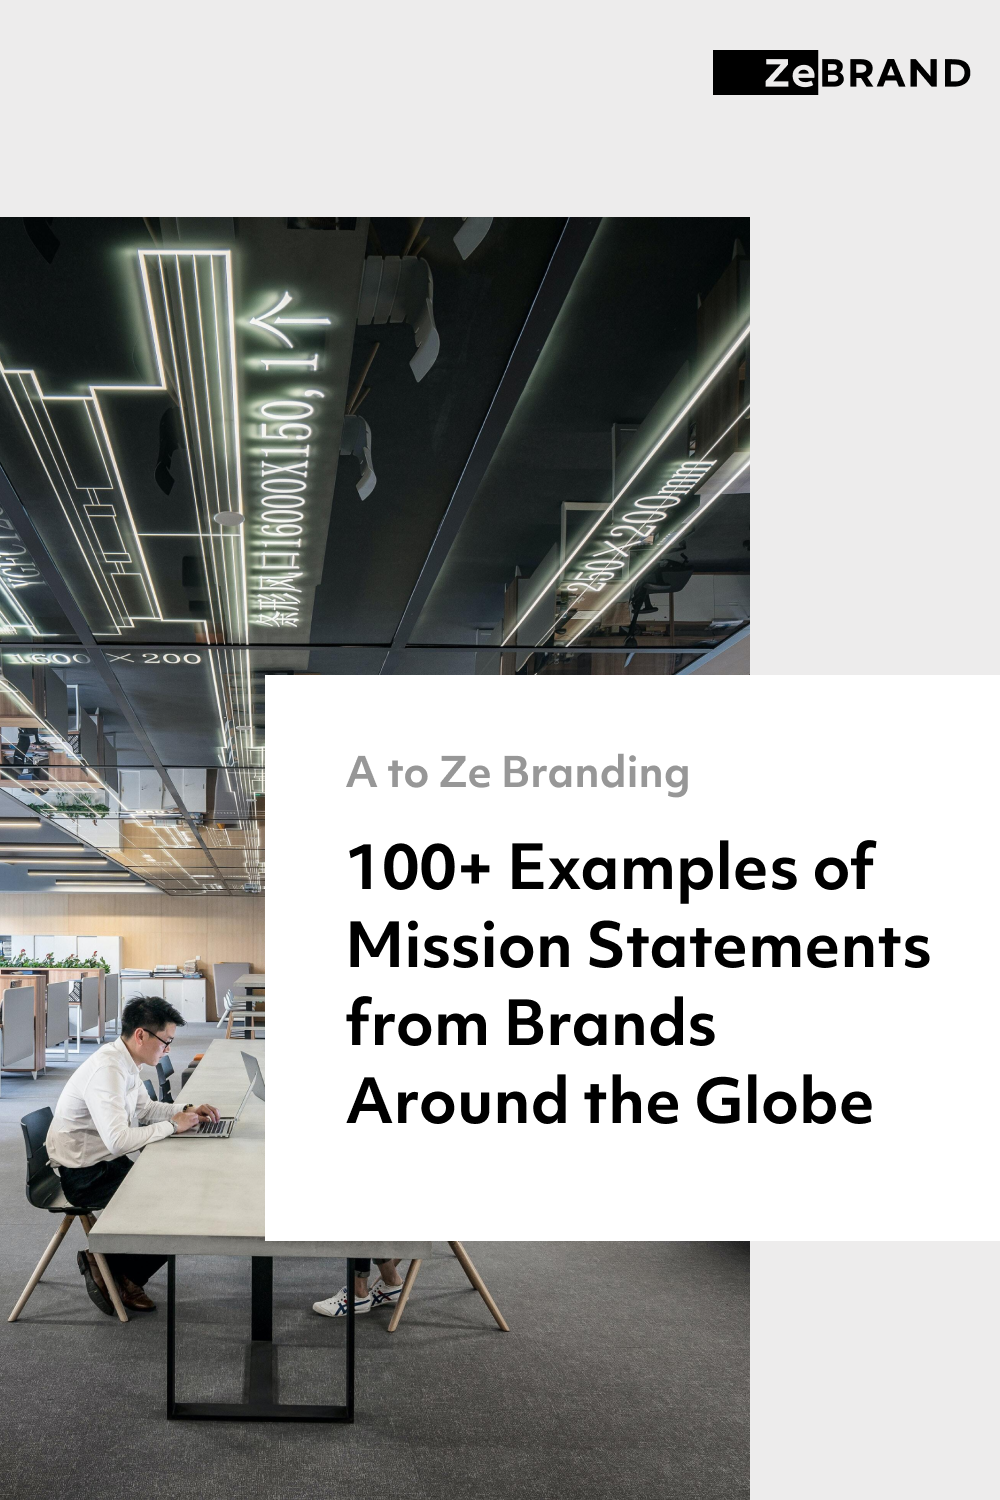 100+ Examples of Mission Statements from Brands Around the Globe